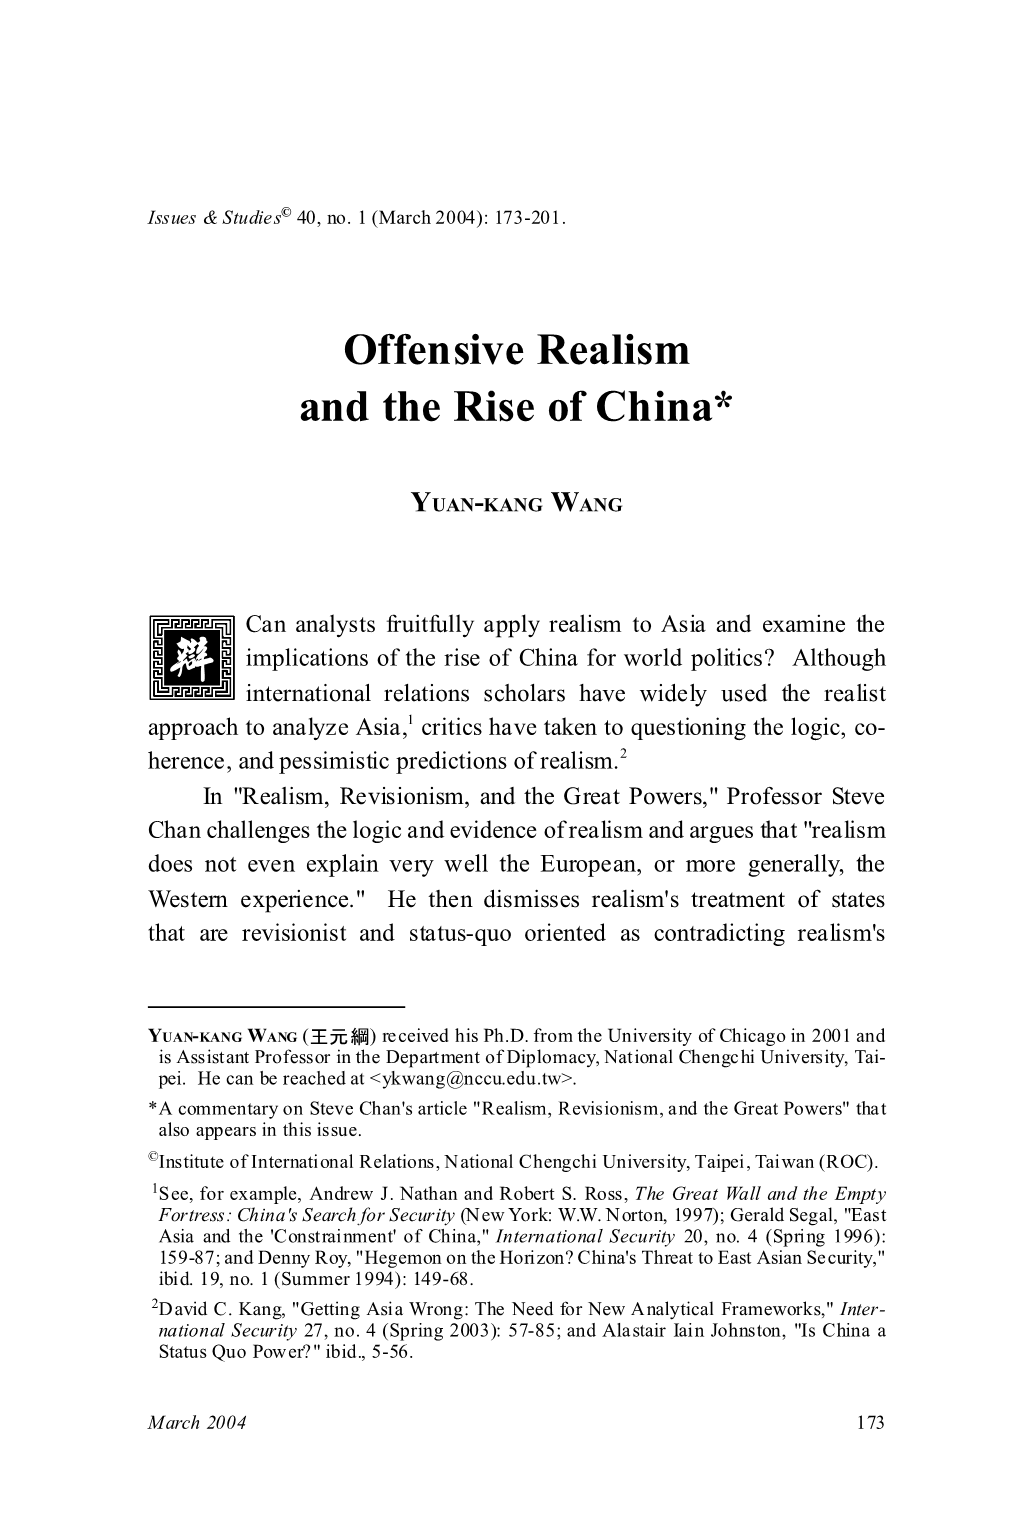 Offensive Realism and the Rise of China*